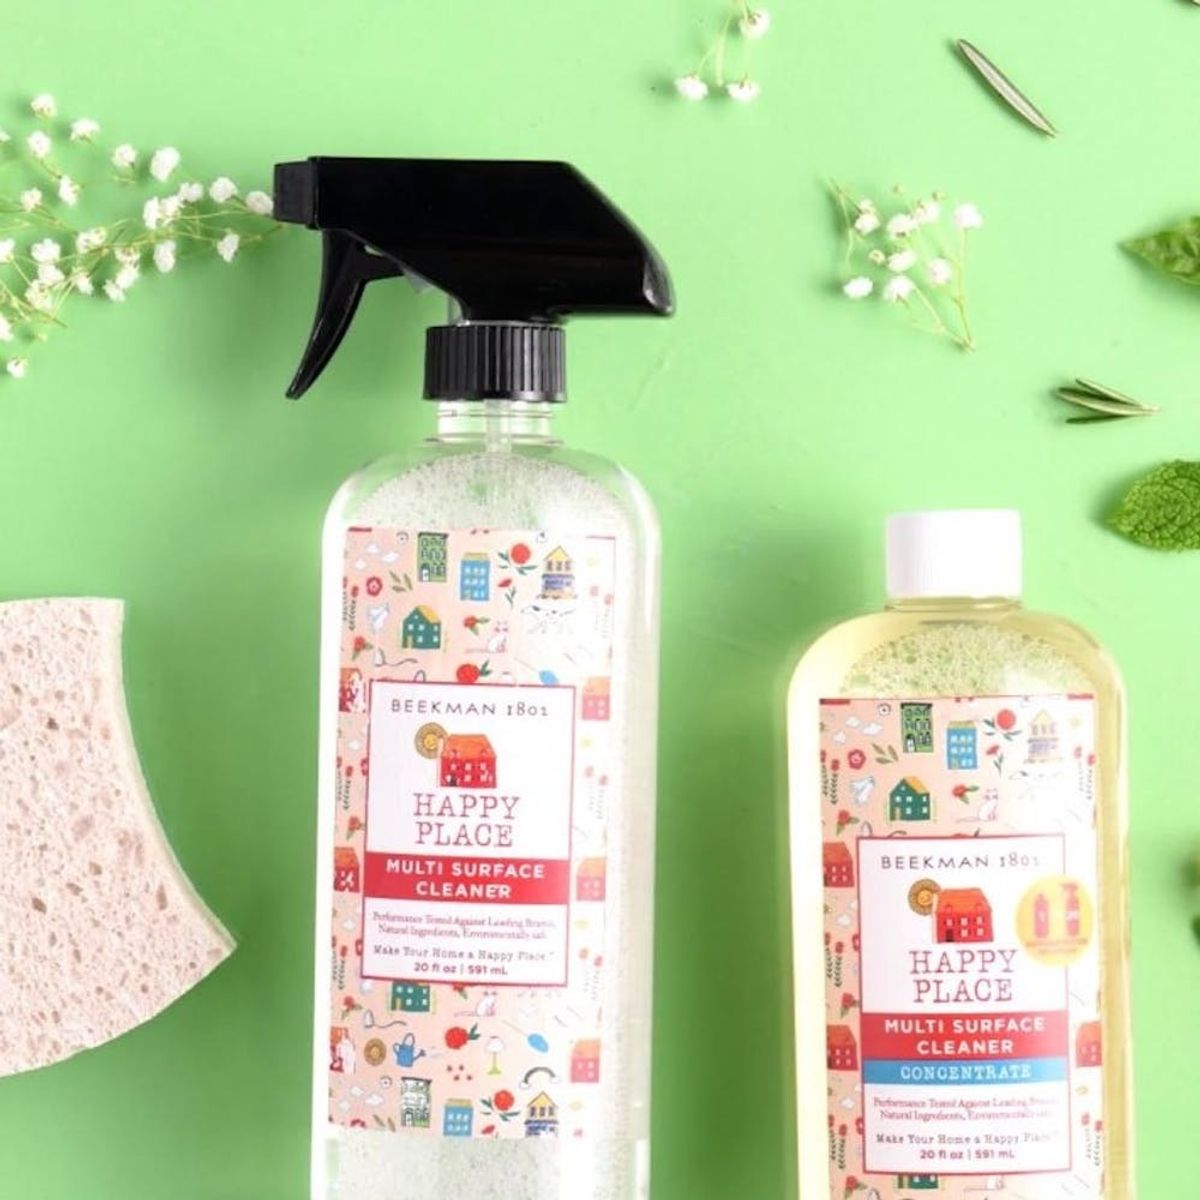 These Natural Cleaning Products Help Make Your Home a Happy Place